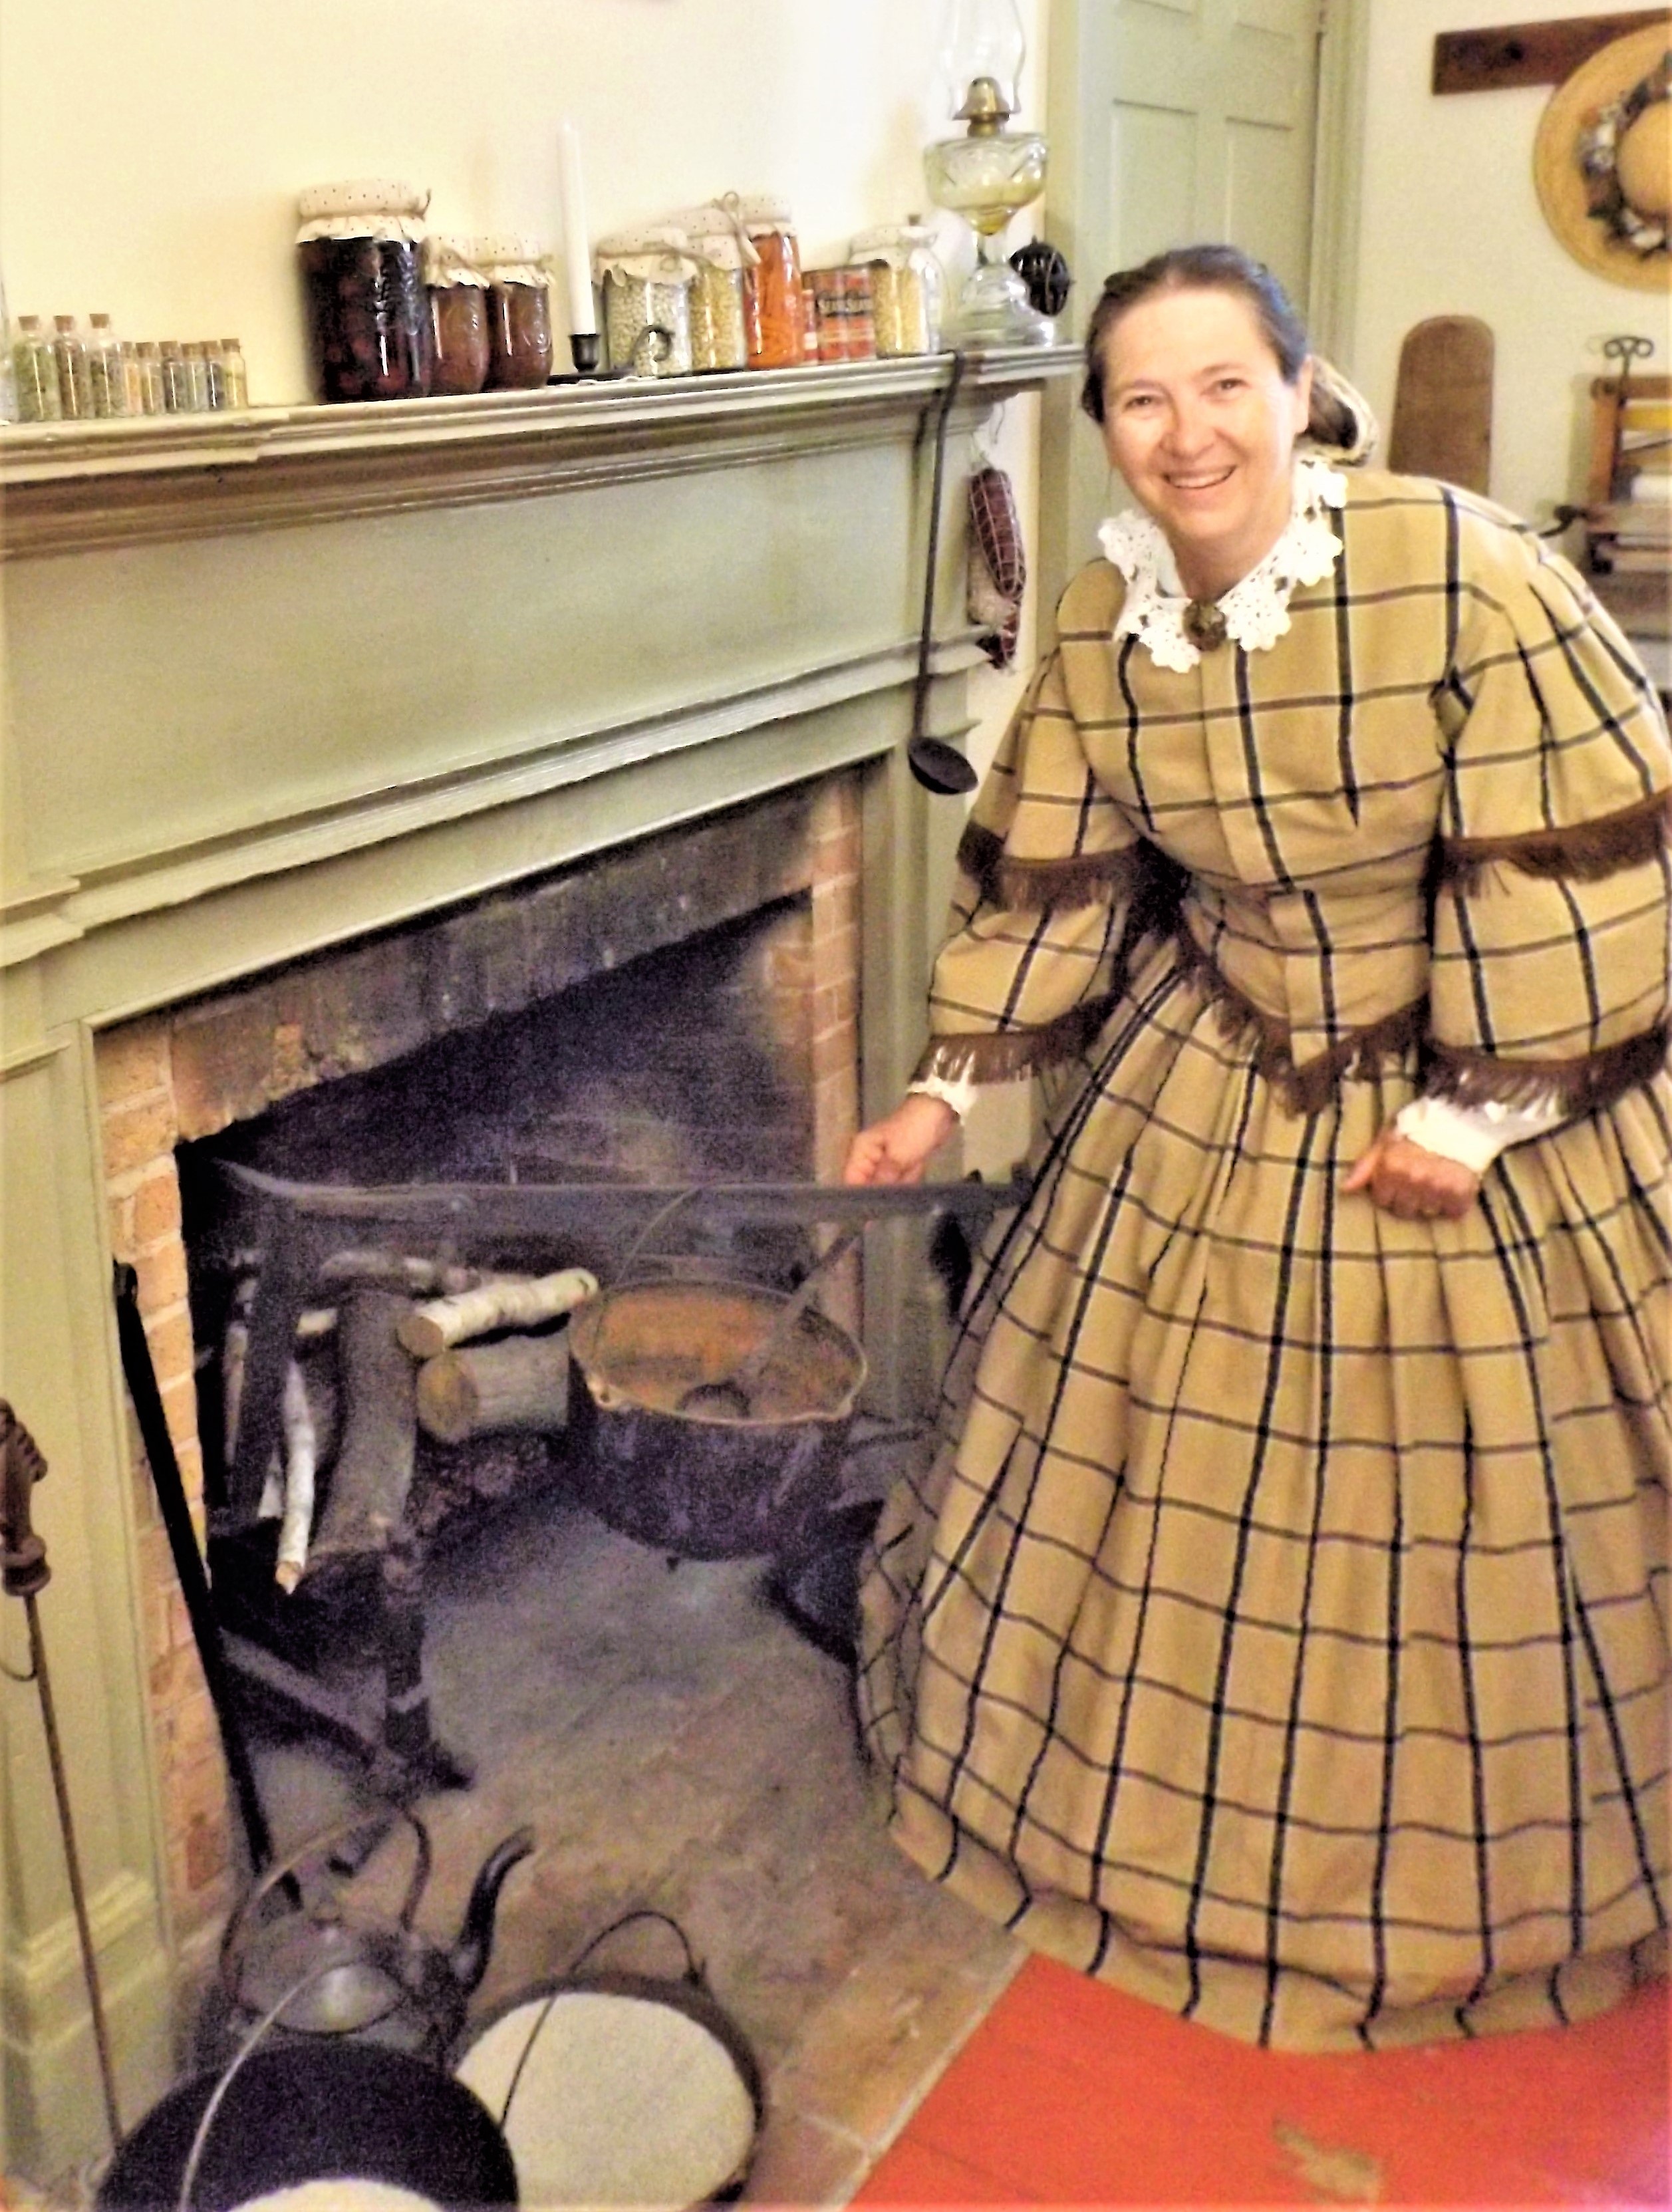 A woman in Victorian clothing demonstrates cooking over a hearth.